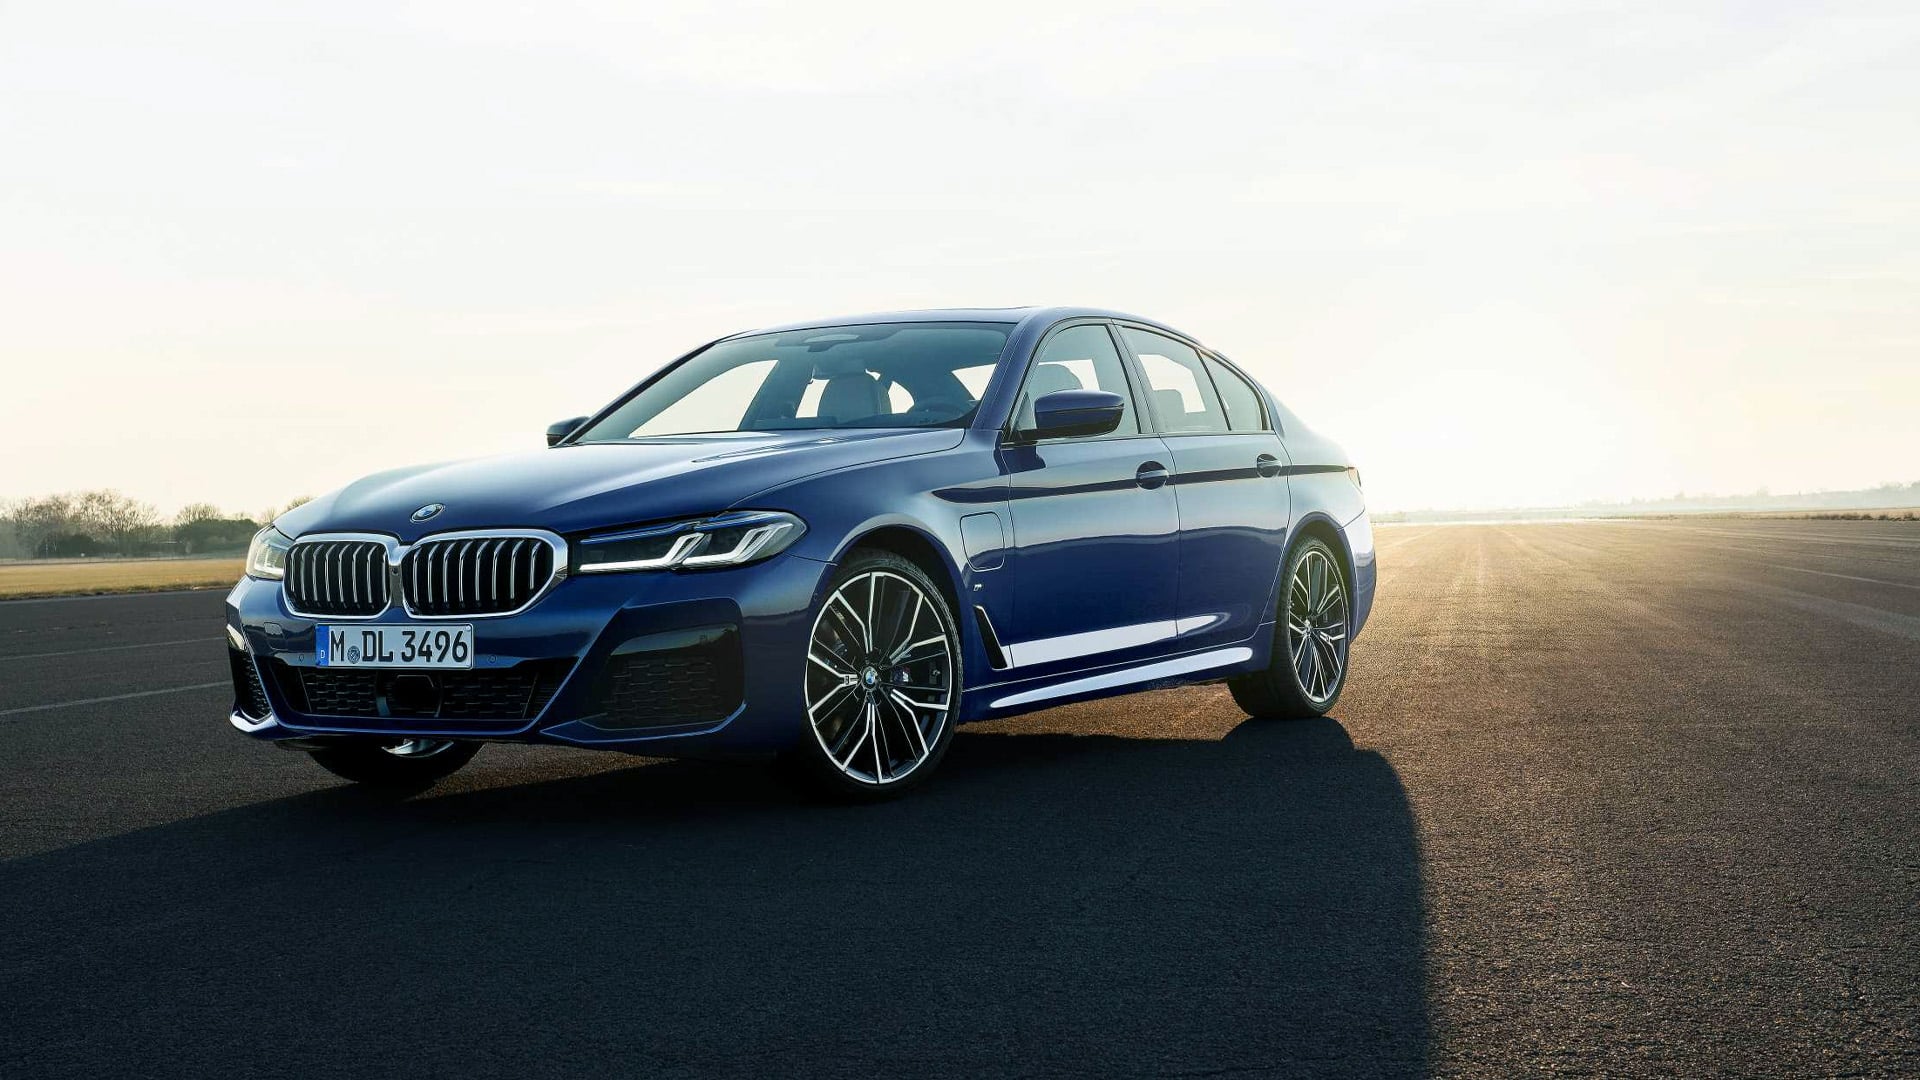 BMW drives in 5 Series M Sport Carbon Edition tagged at Rs 66.3 lakh